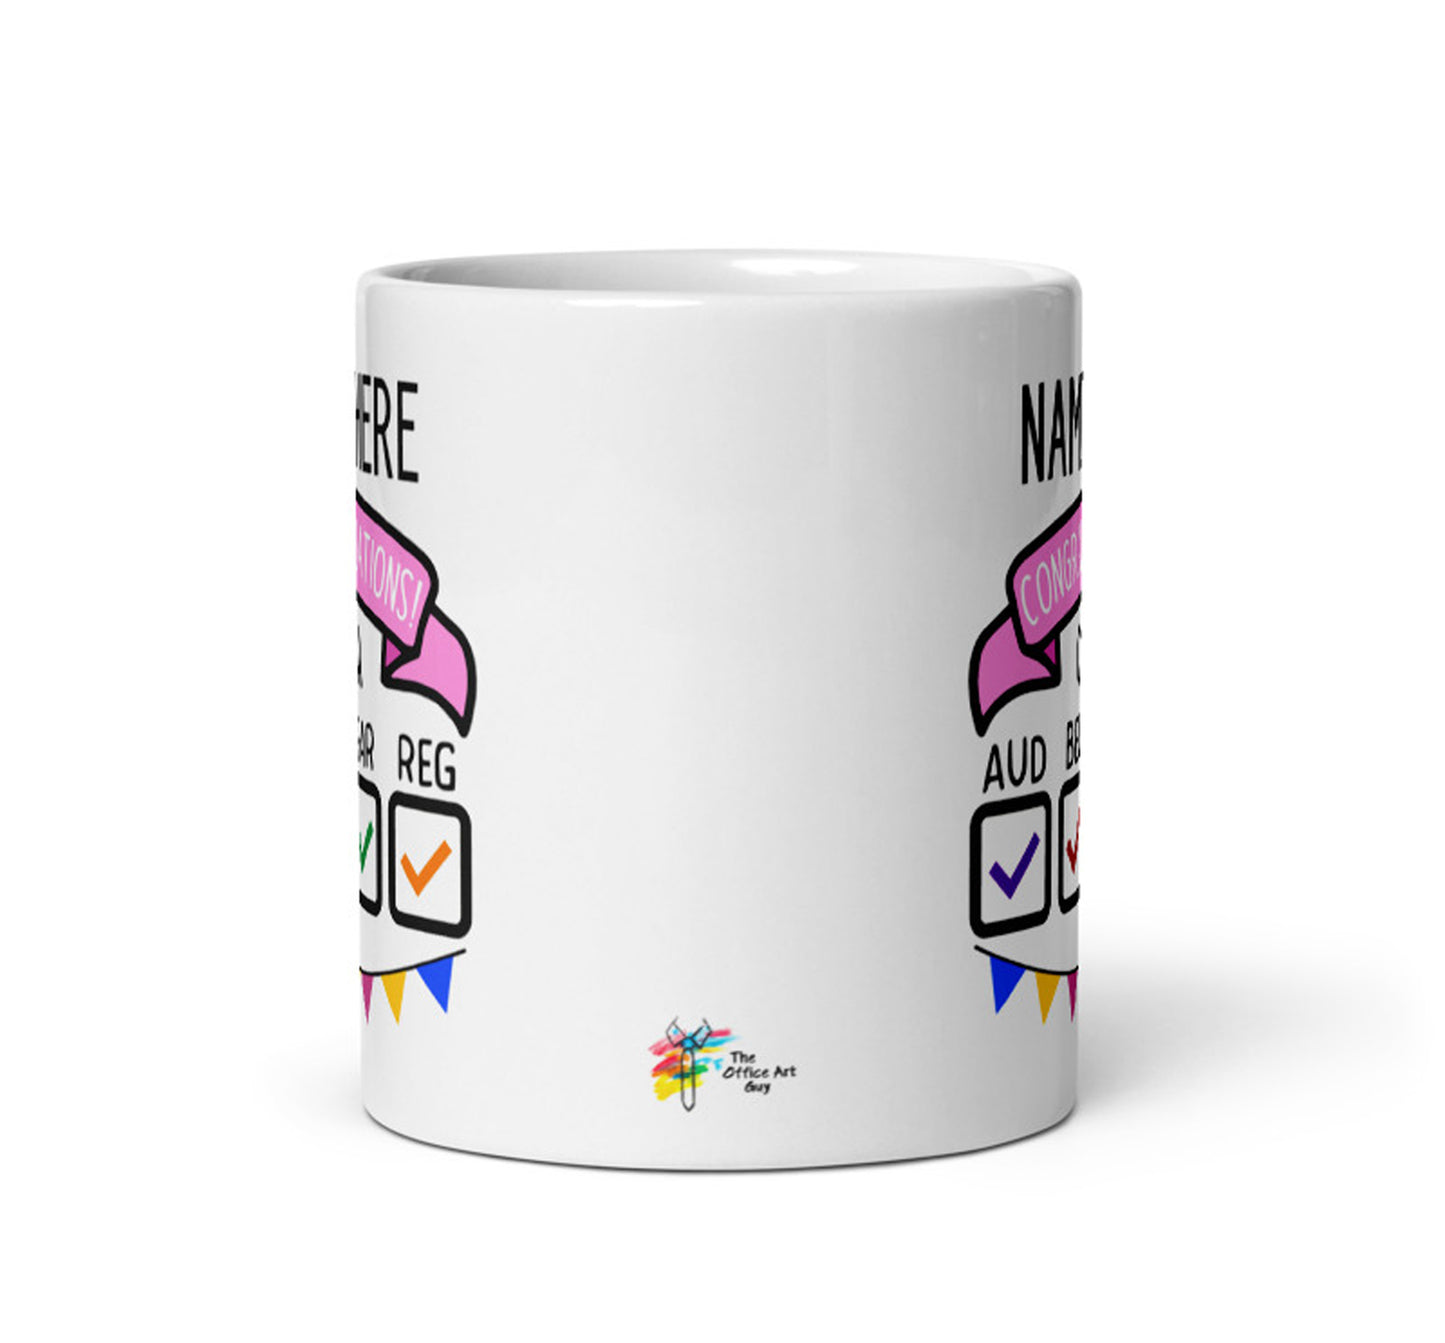 CPA Gift for Passing CPA Exams, Personalized Mug